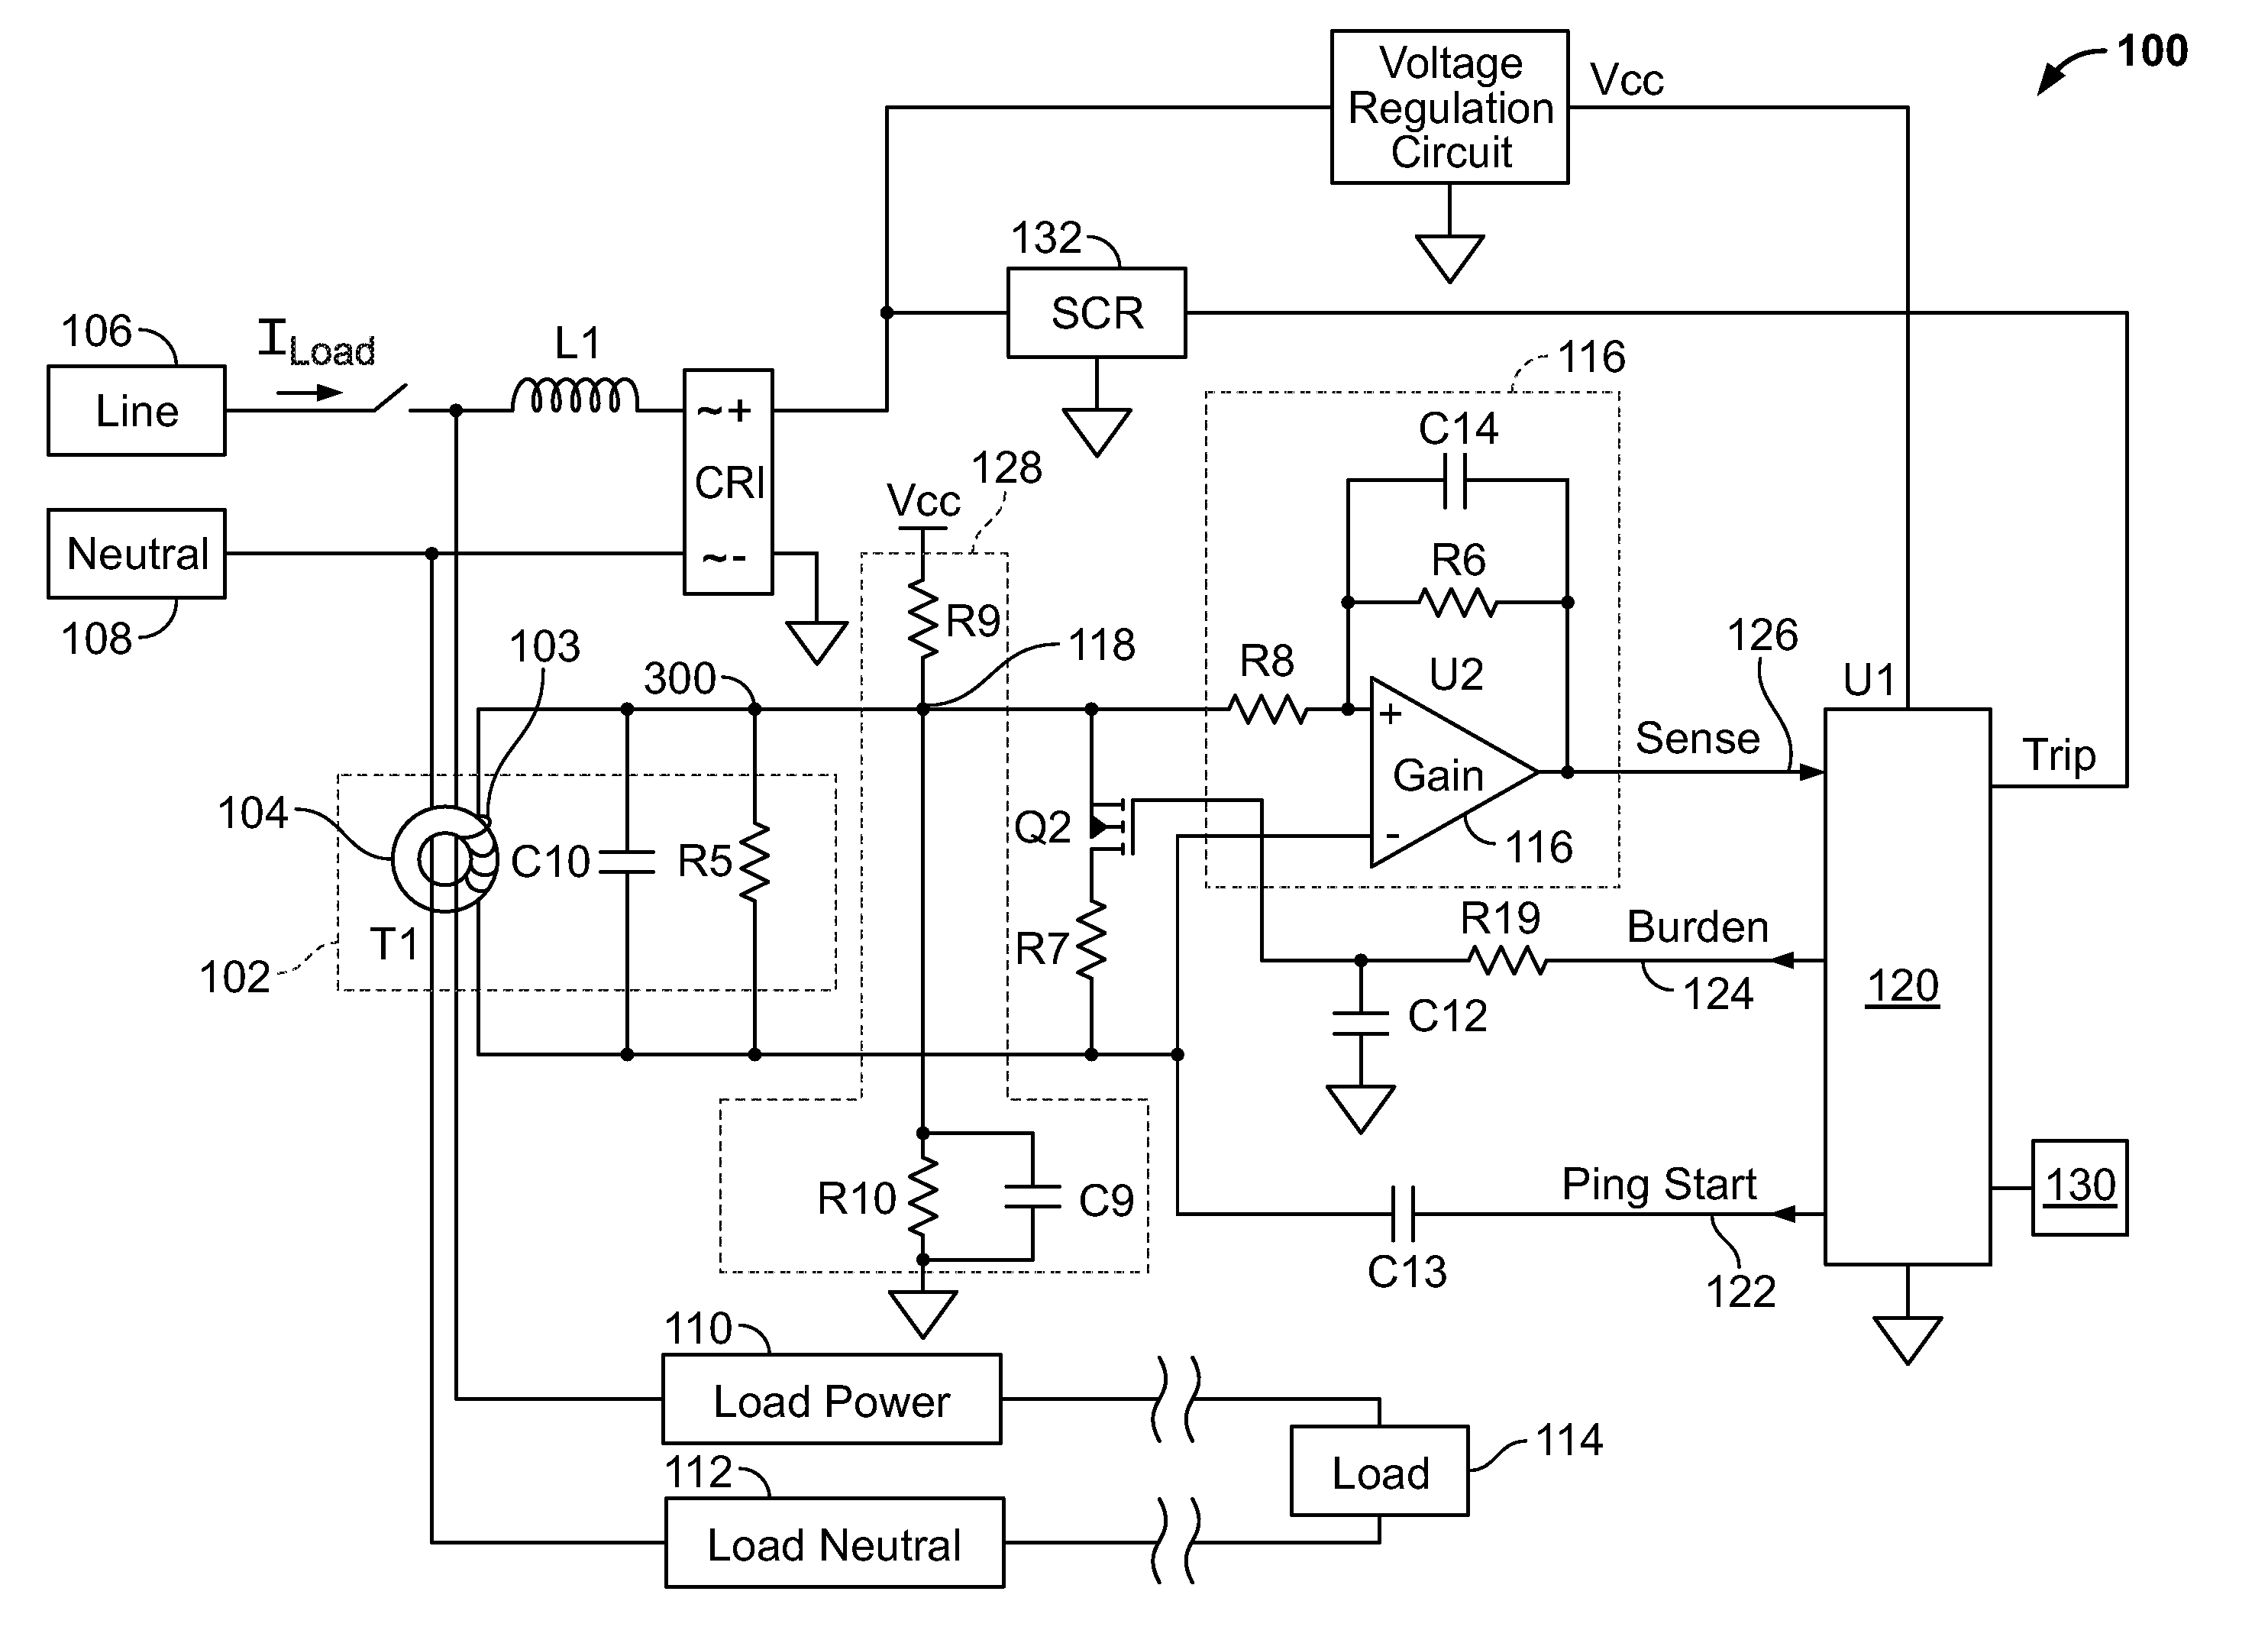 Apparatus and method for measuring load current using a ground fault sensing transformer